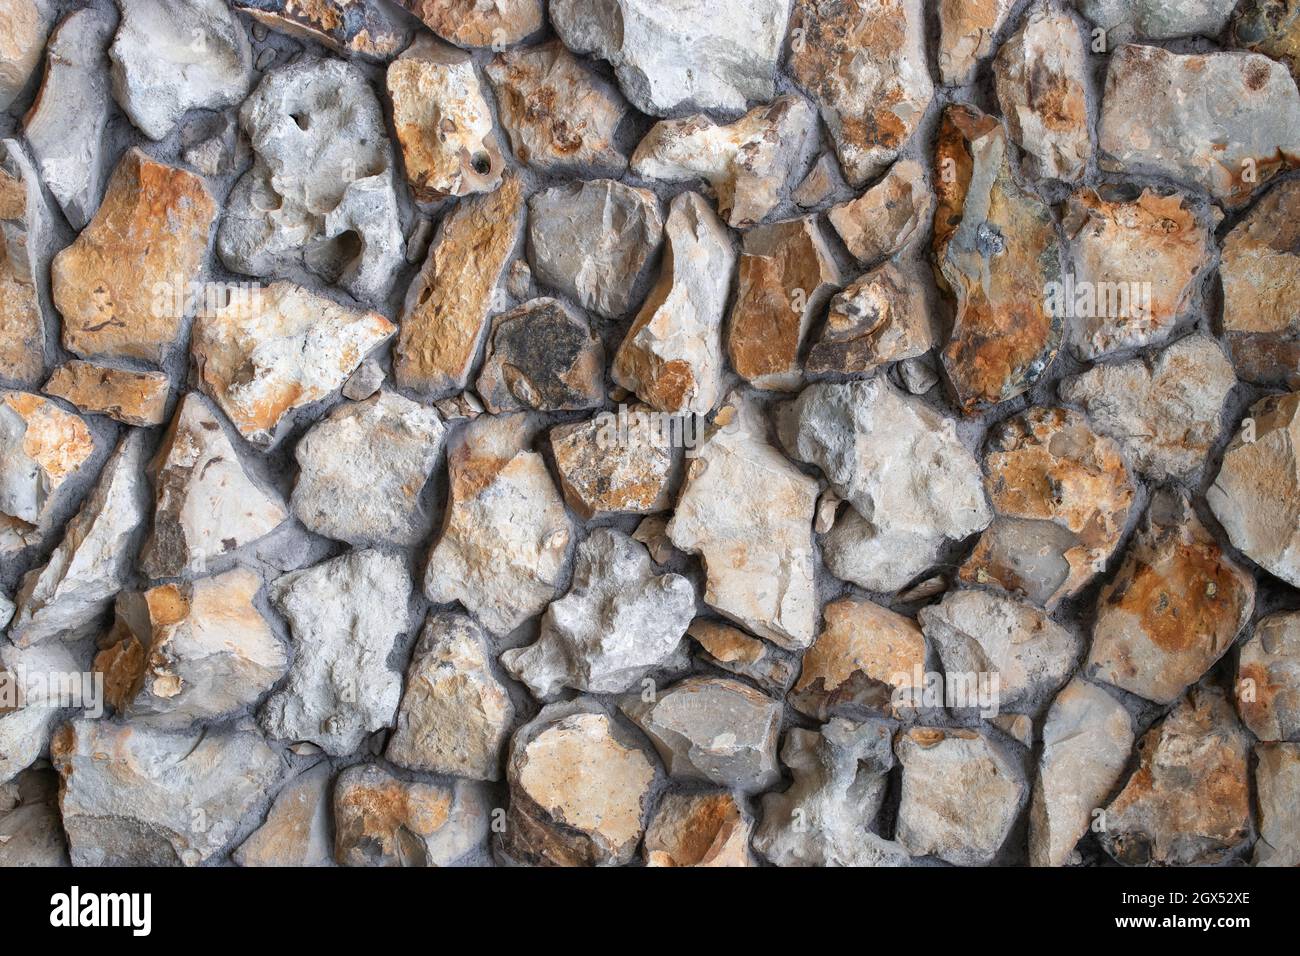 Background with rough rock stones. Stock Photo